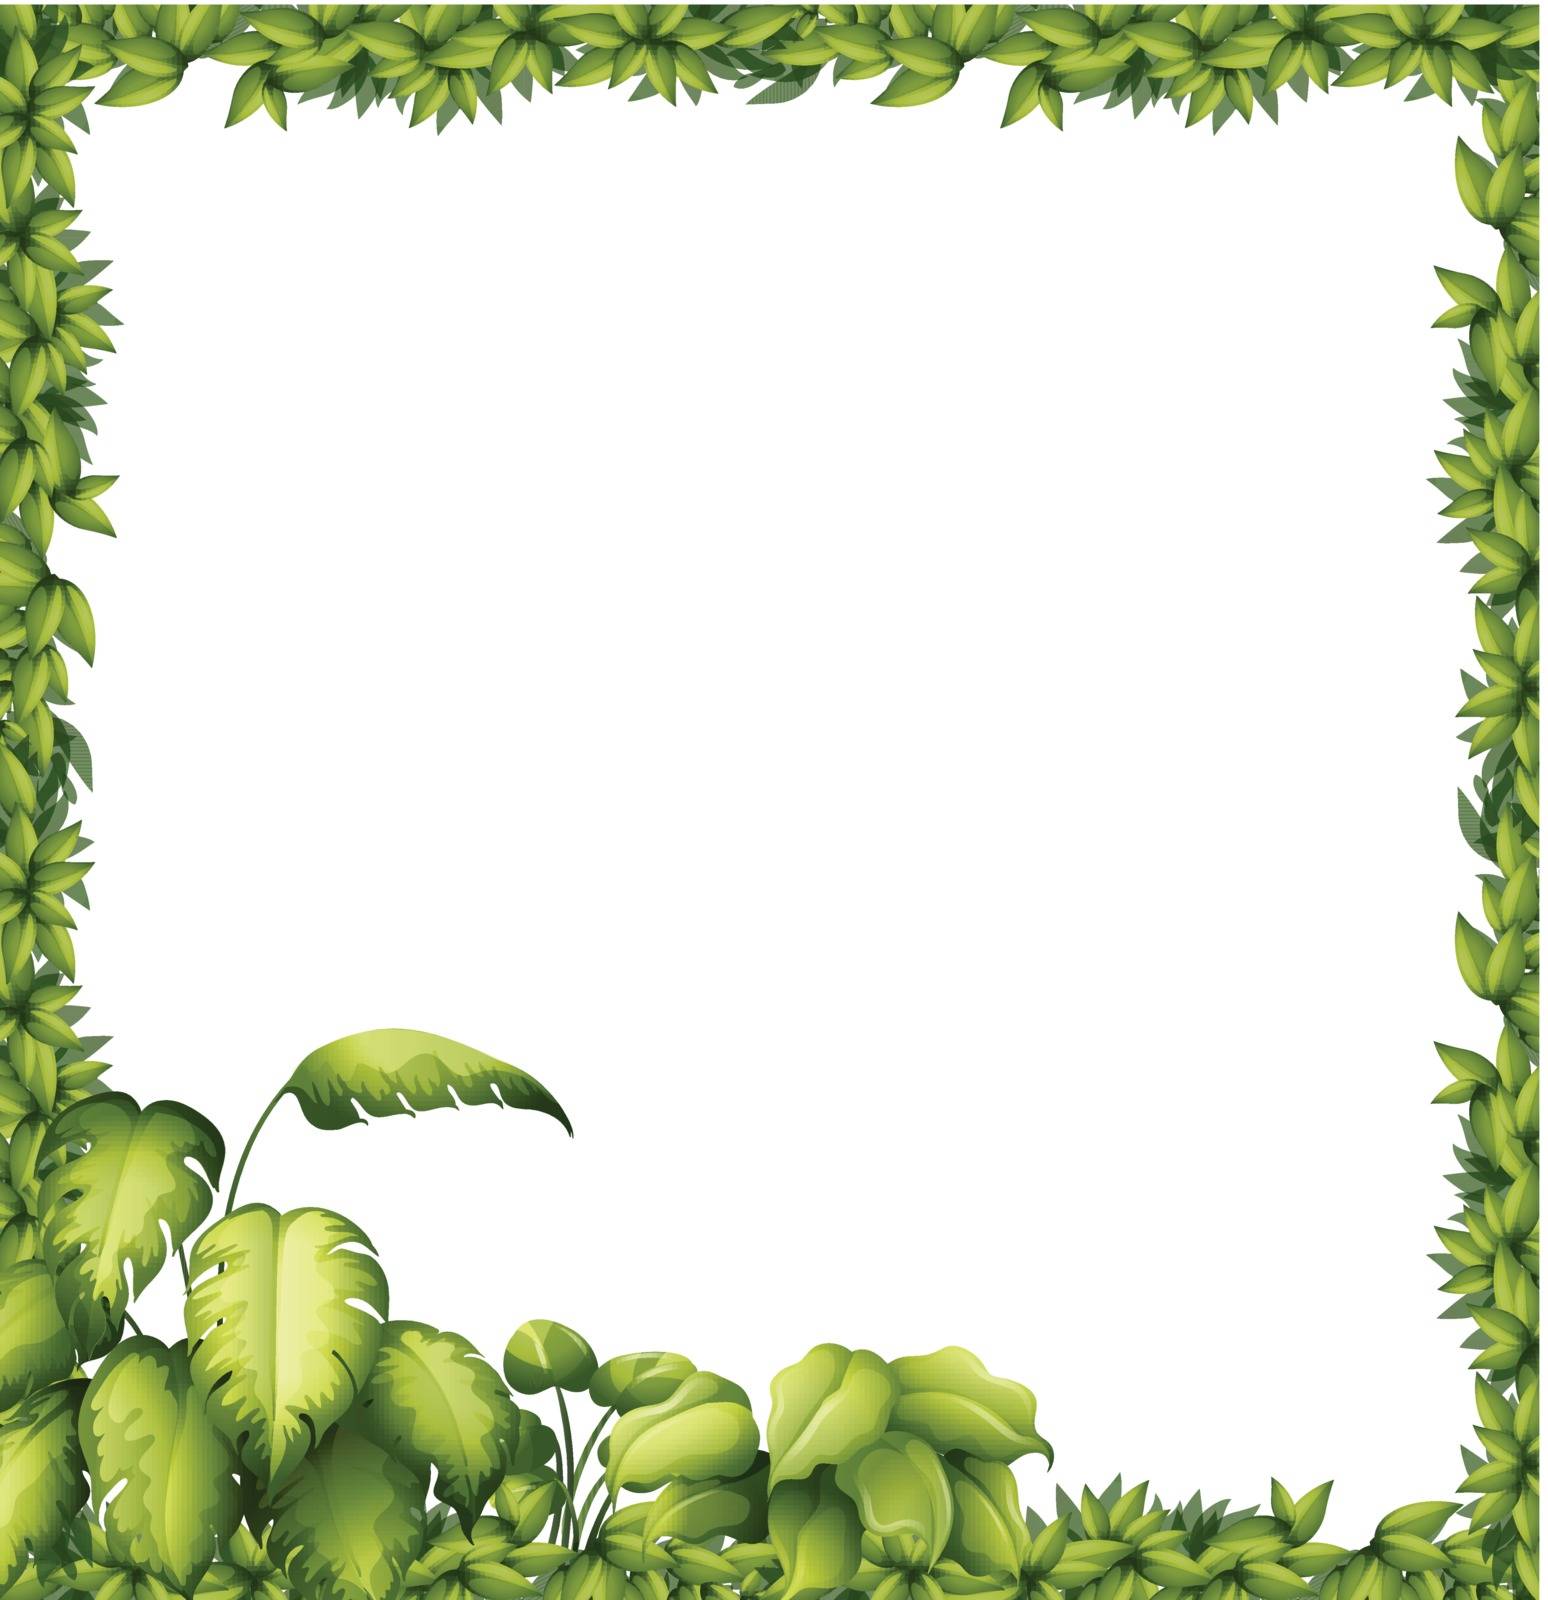 Illustration of a green frame on a white background